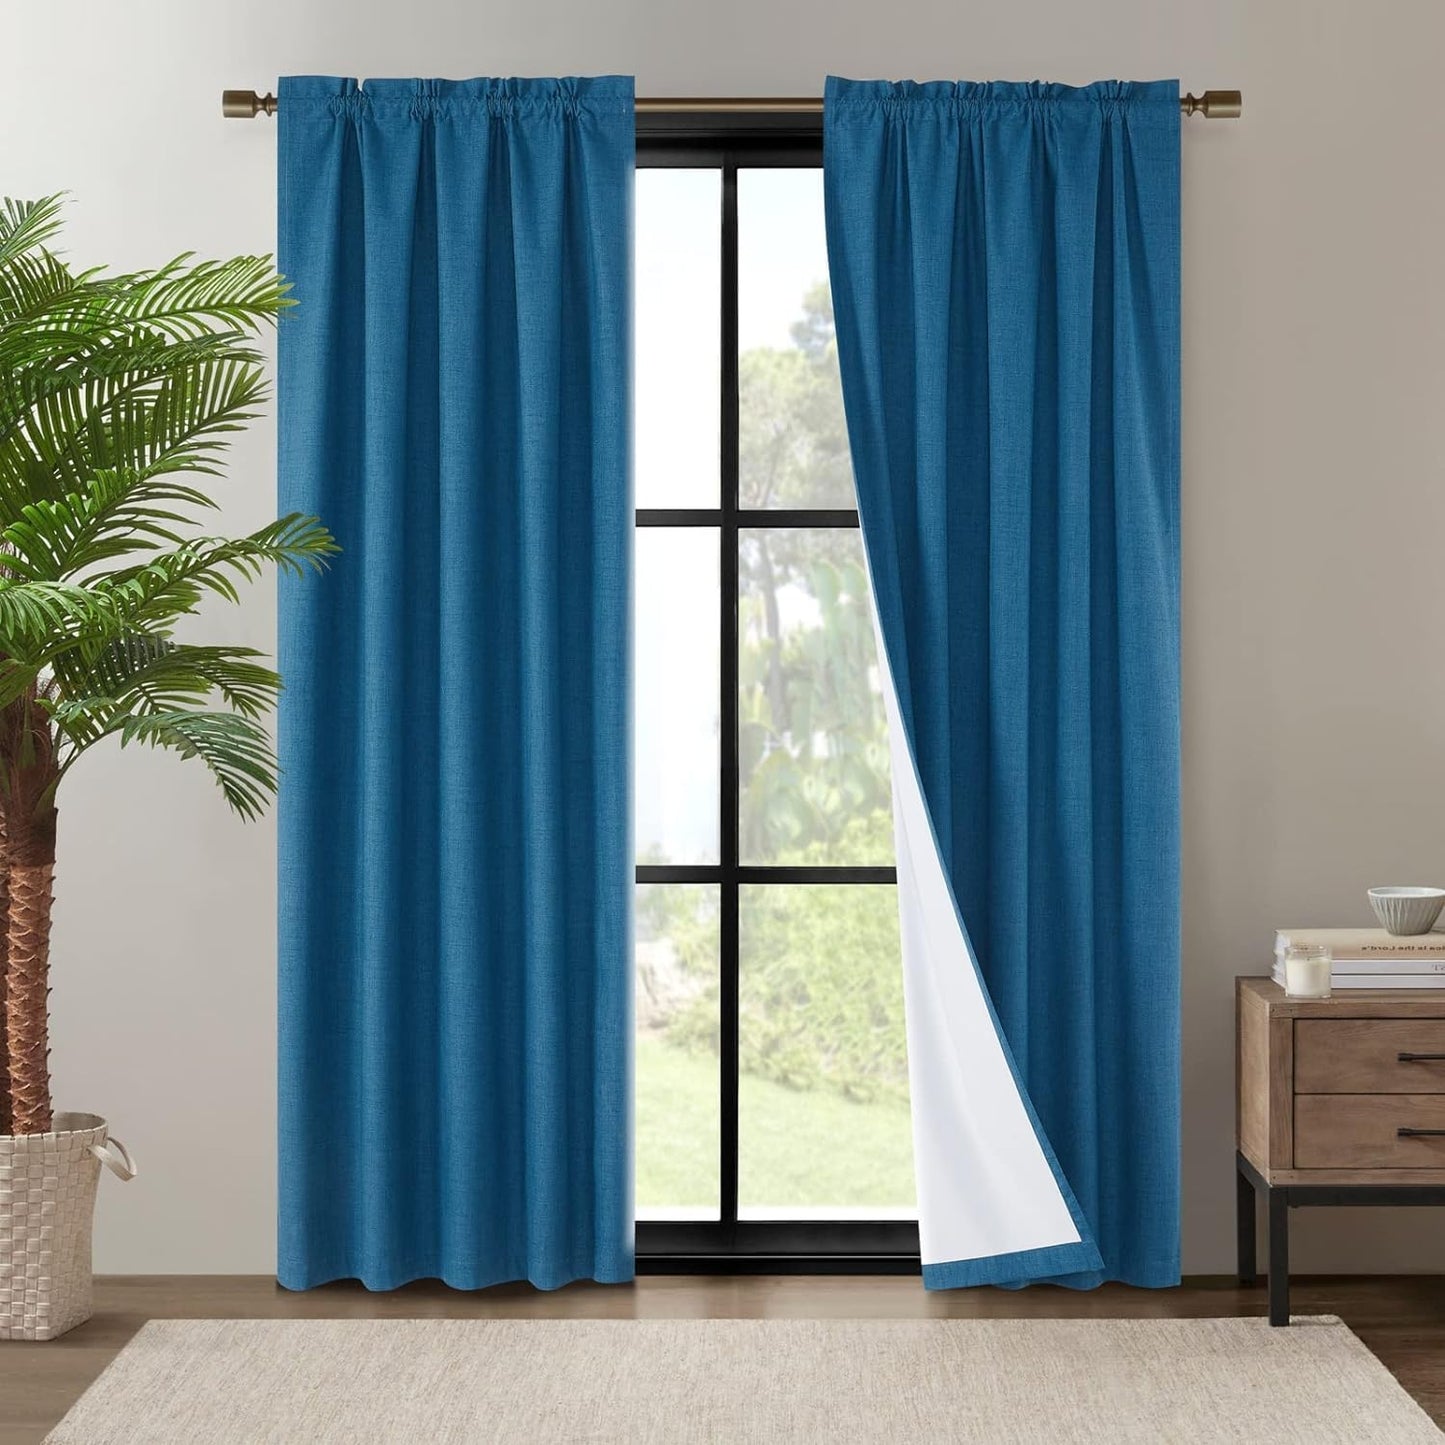 Dreaming Casa Linen Blackout Curtains for Beadroom 2 Panels 96 Inch Long Living Room Drapes Boho Rustic 100% Black Out Natural Window Curtain with Rod Pocket, 52" W X 96" L  Dreaming Casa Blue, Rod Pocket 2 X (72"W X 84"L) 